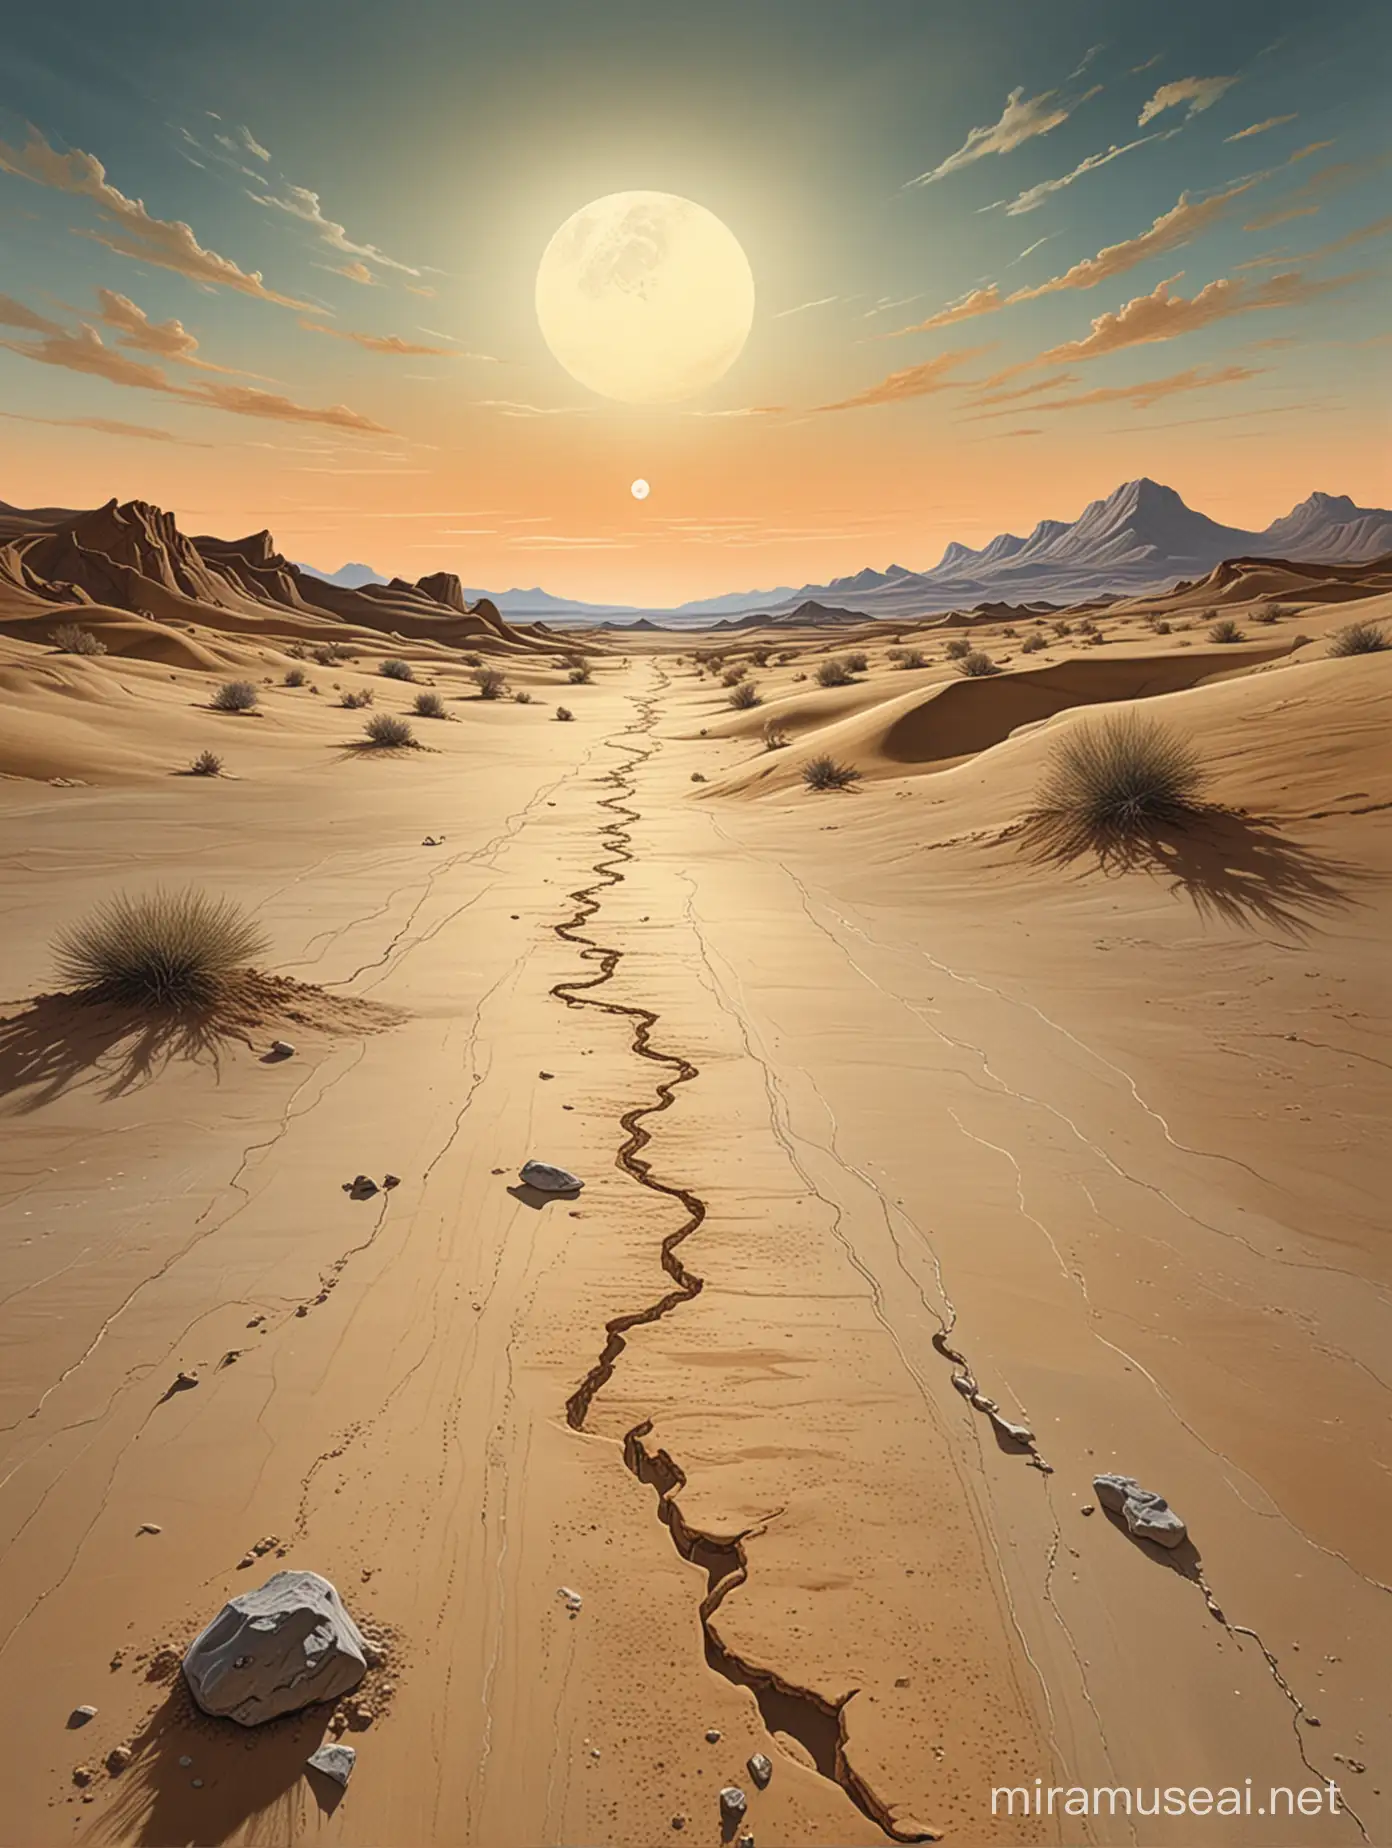 Surreal Desert Landscape with Pale Moon Inspired by Salvador Dalis The Persistence of Memory